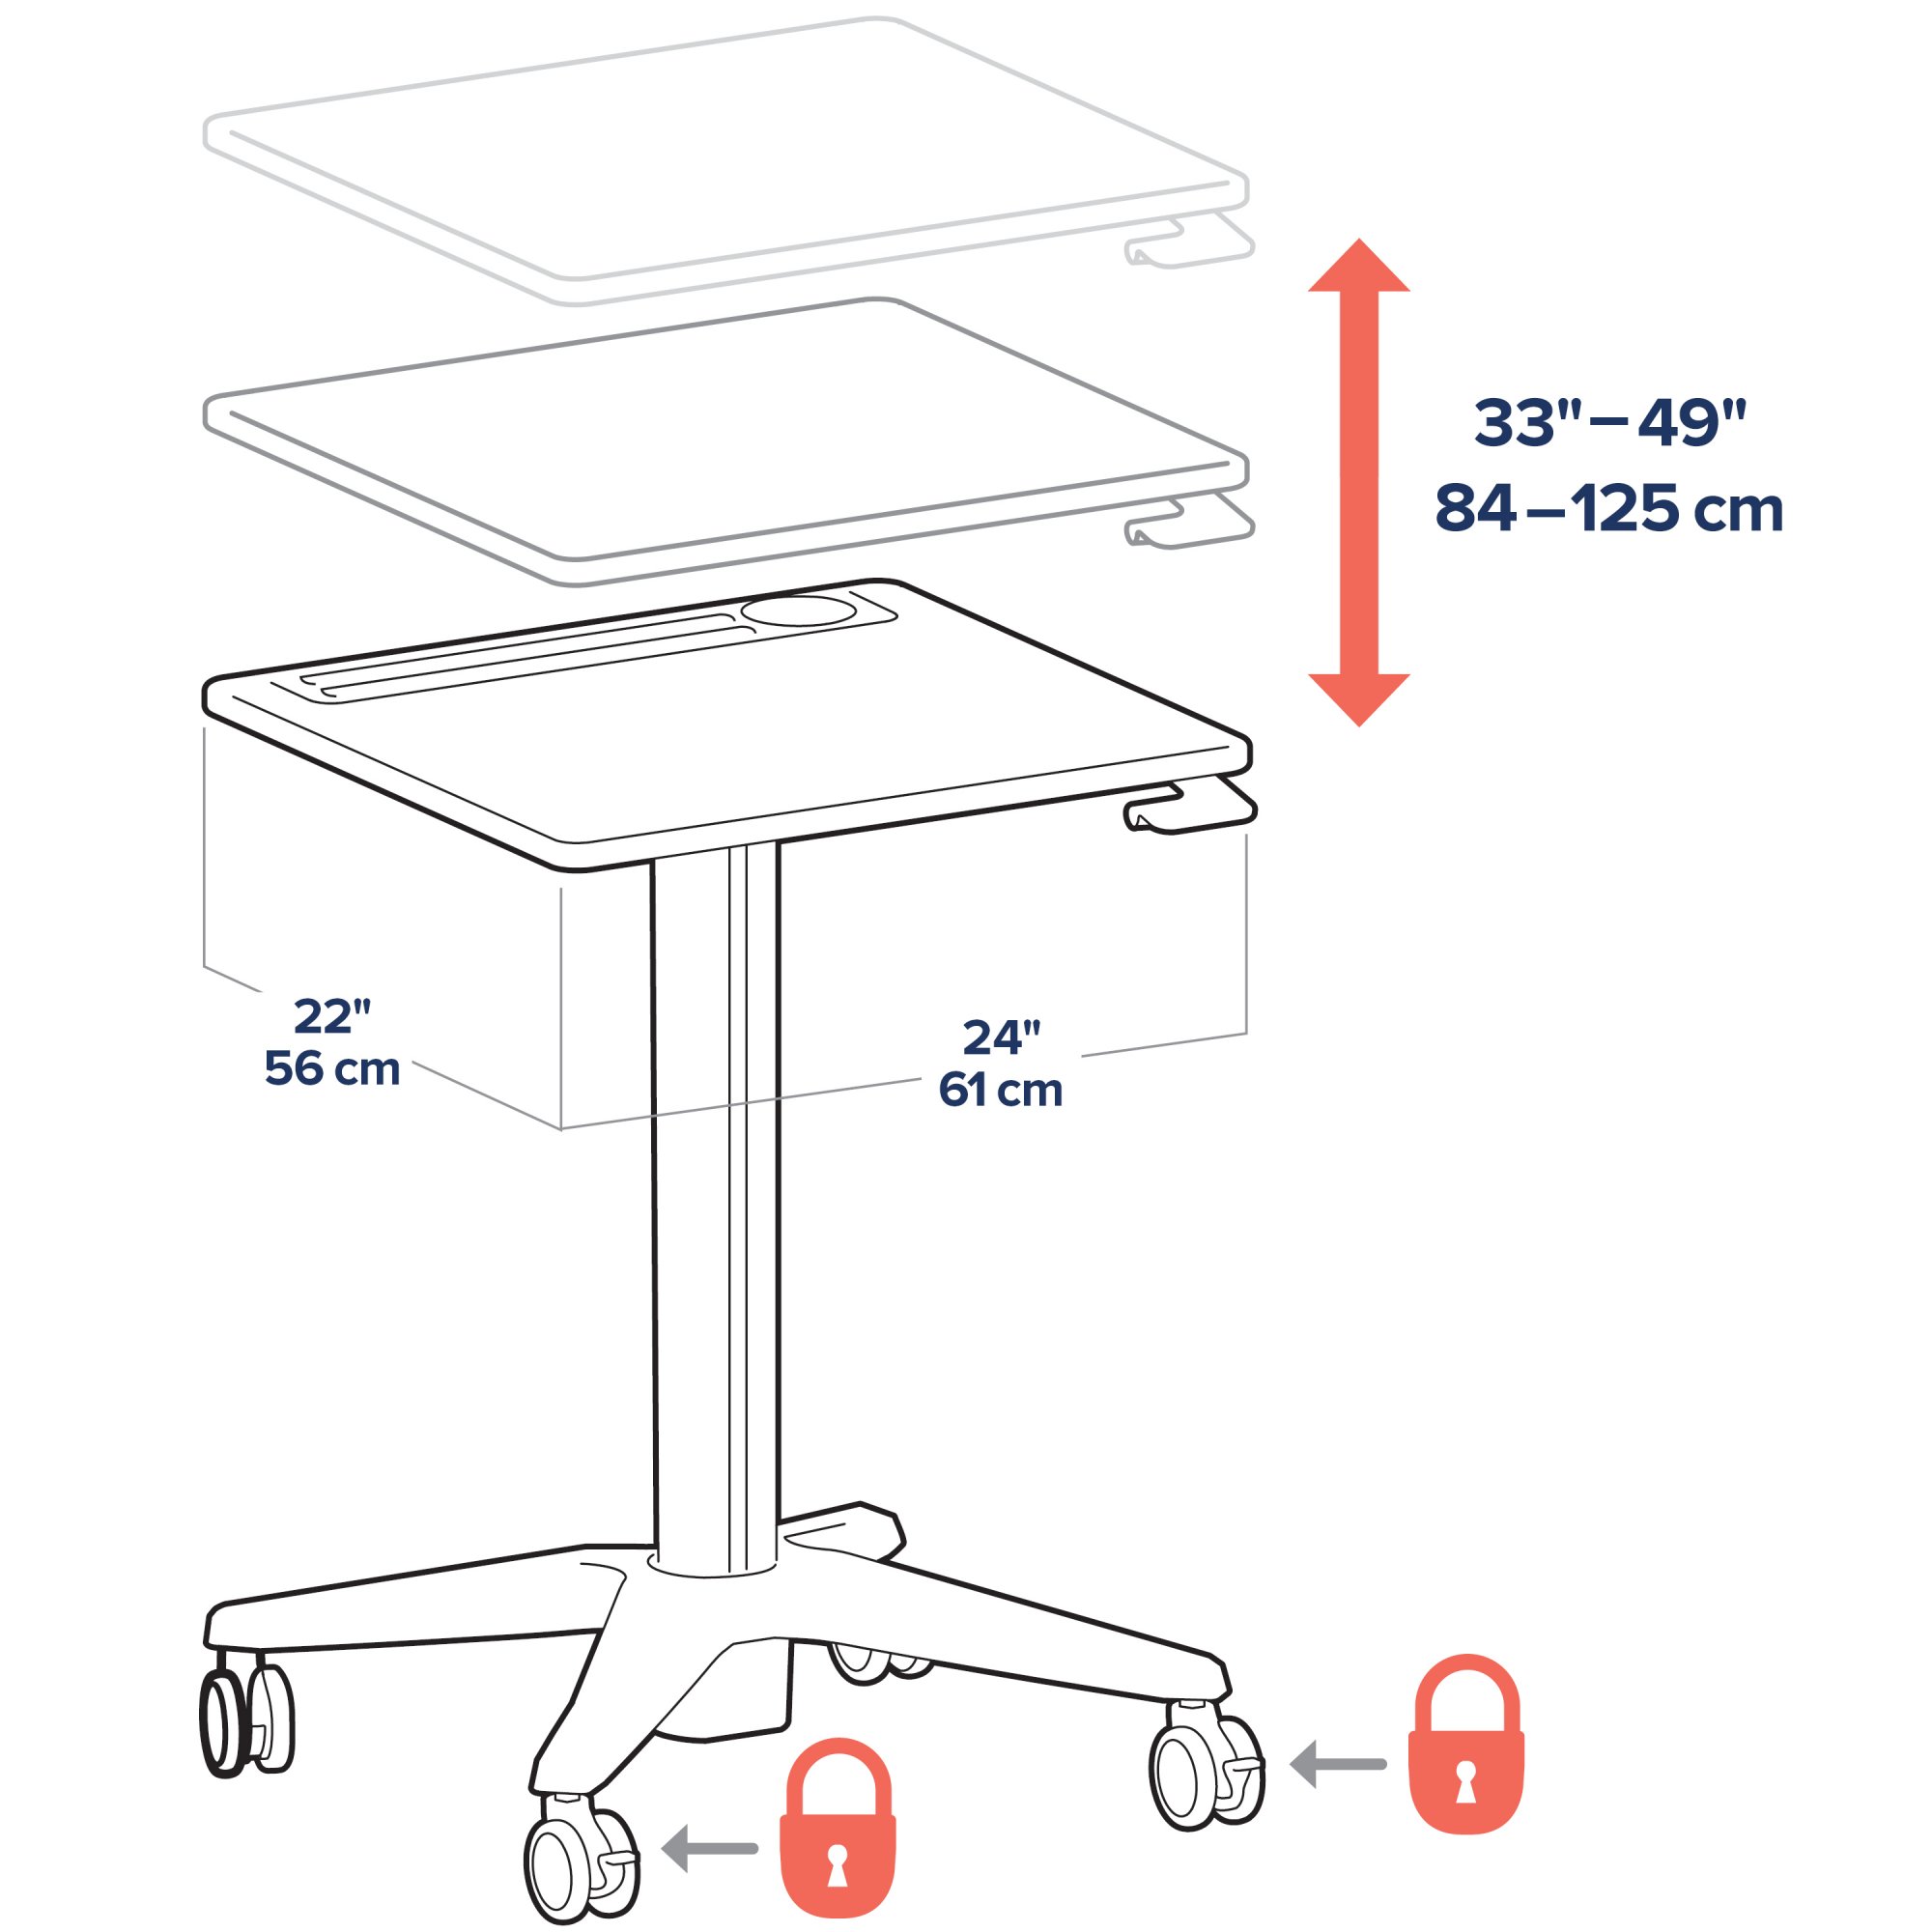 Ergotron 24-481-003 LearnFit Sit-Stand Desk for Students 9 years and over